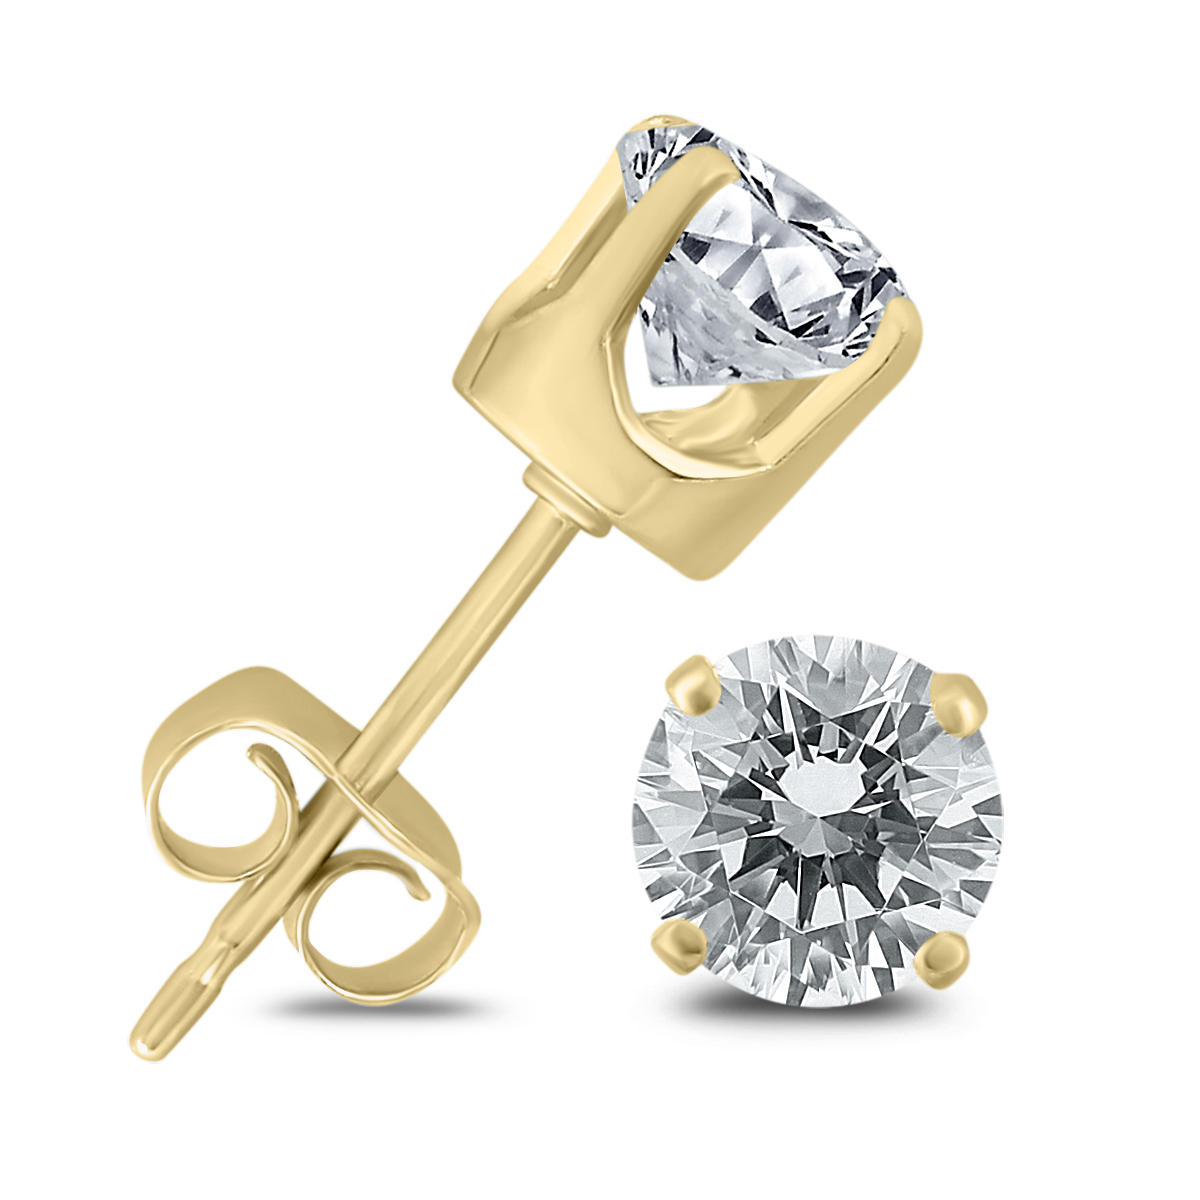 Image of 1 Carat TW Diamond Solitaire Stud Earrings in 14K Yellow Gold (I-J COLOR SI2-SI3 CLARITY)